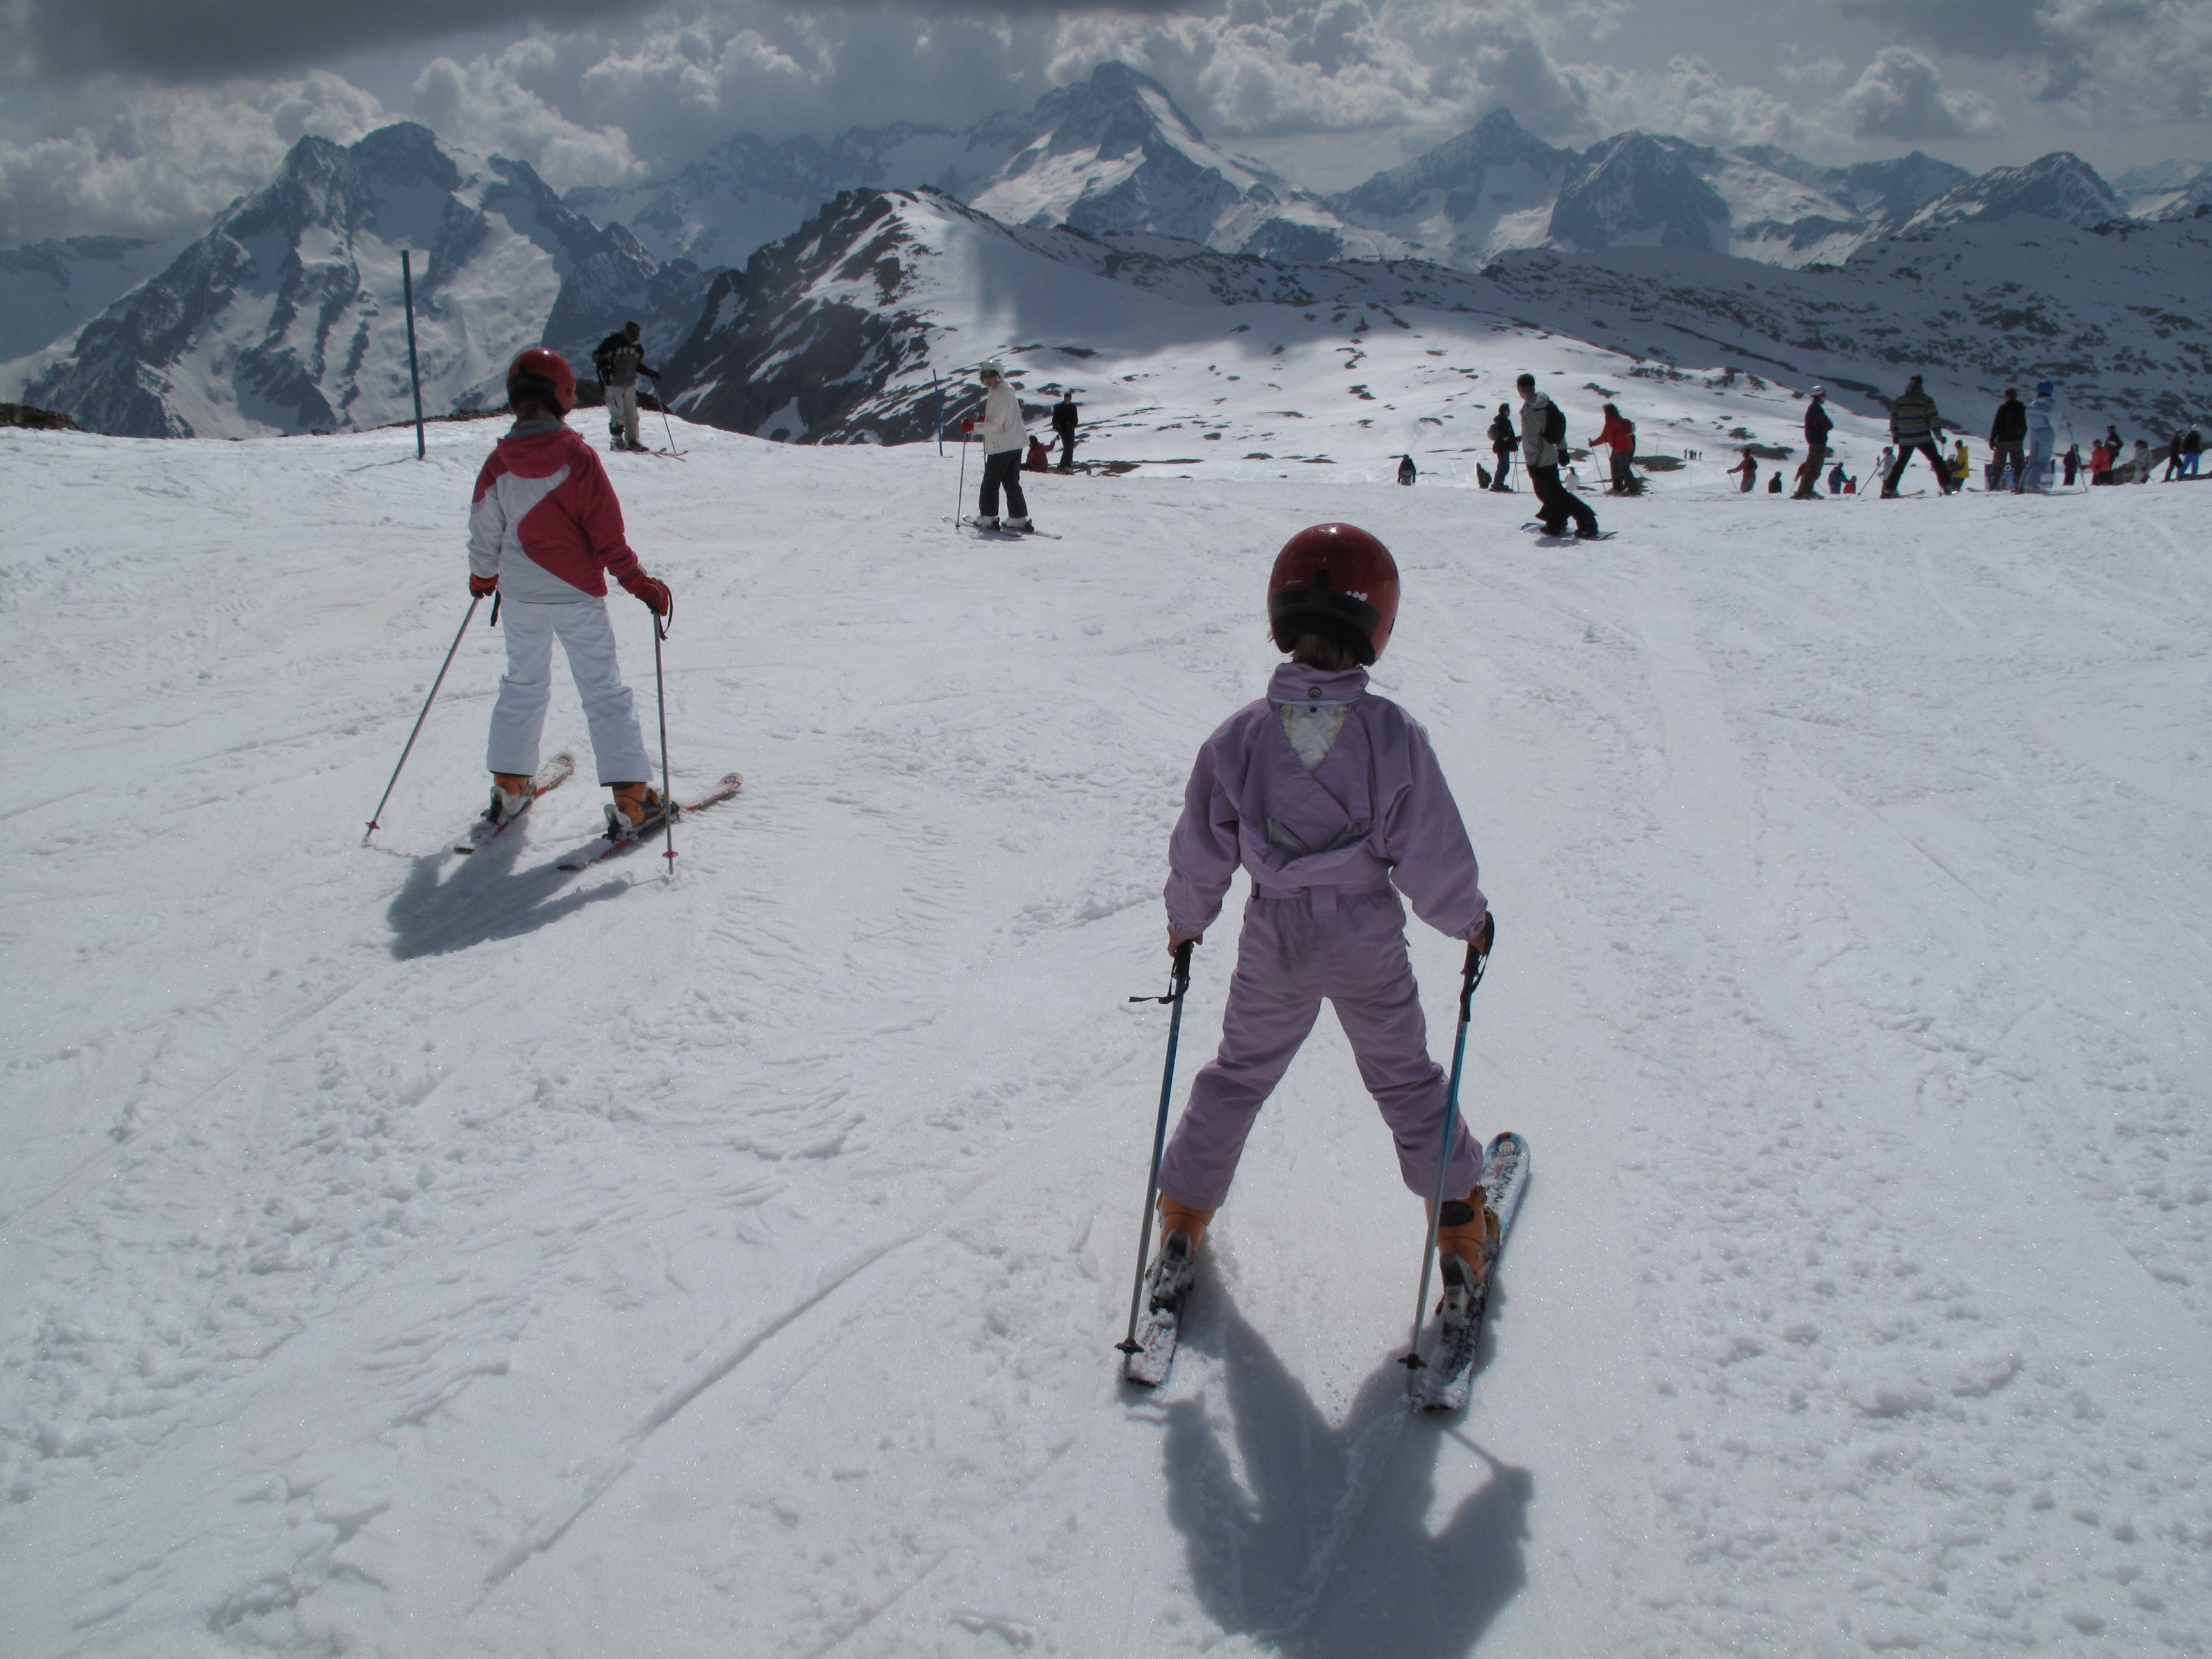 France has just loosened its travel ban a little but sadly not for the purposes of skiing